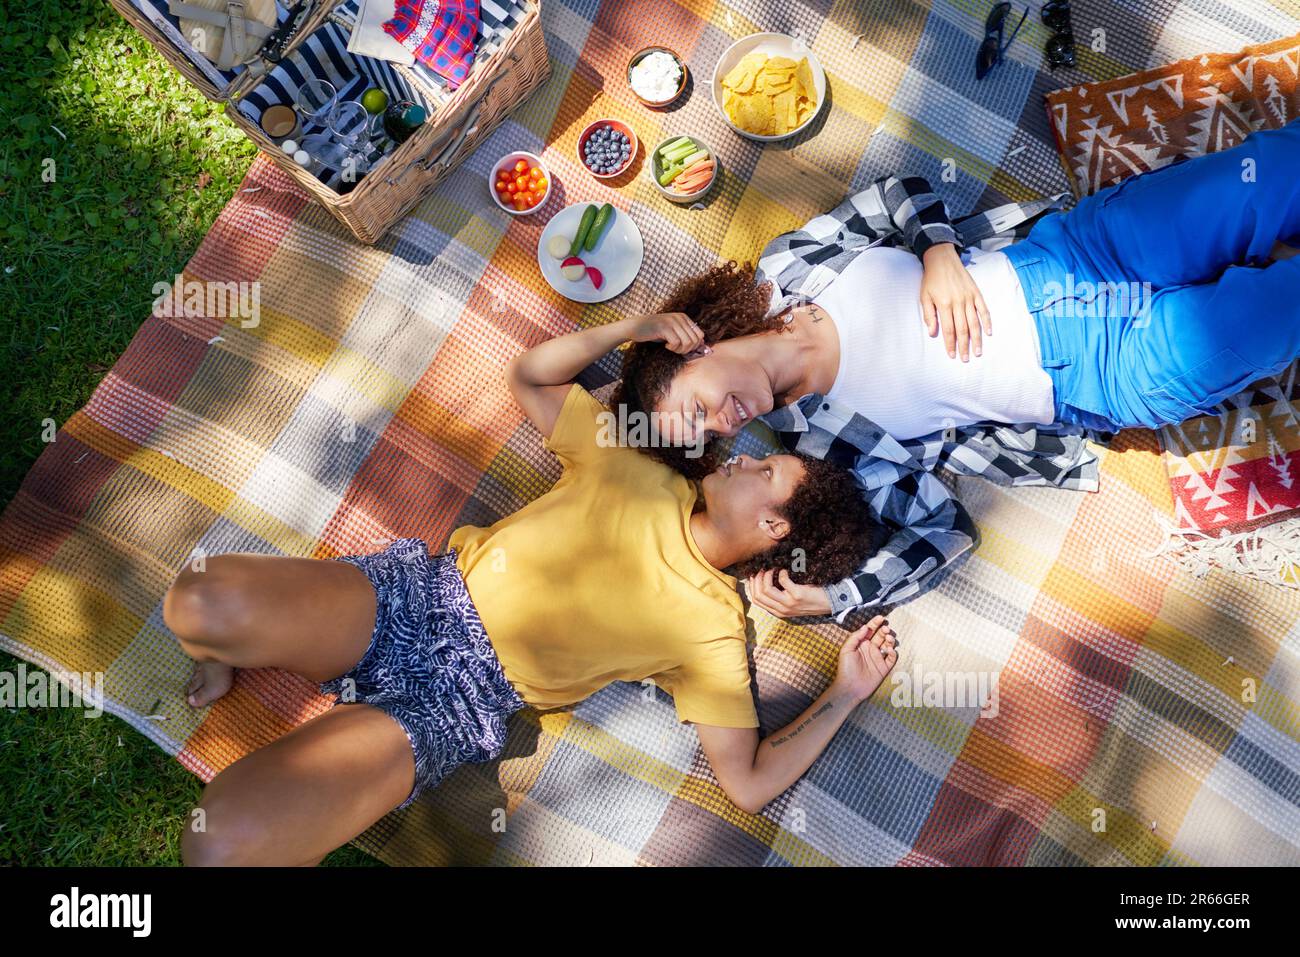 View from above happy lesbian couple laying on picnic blanket Stock Photo